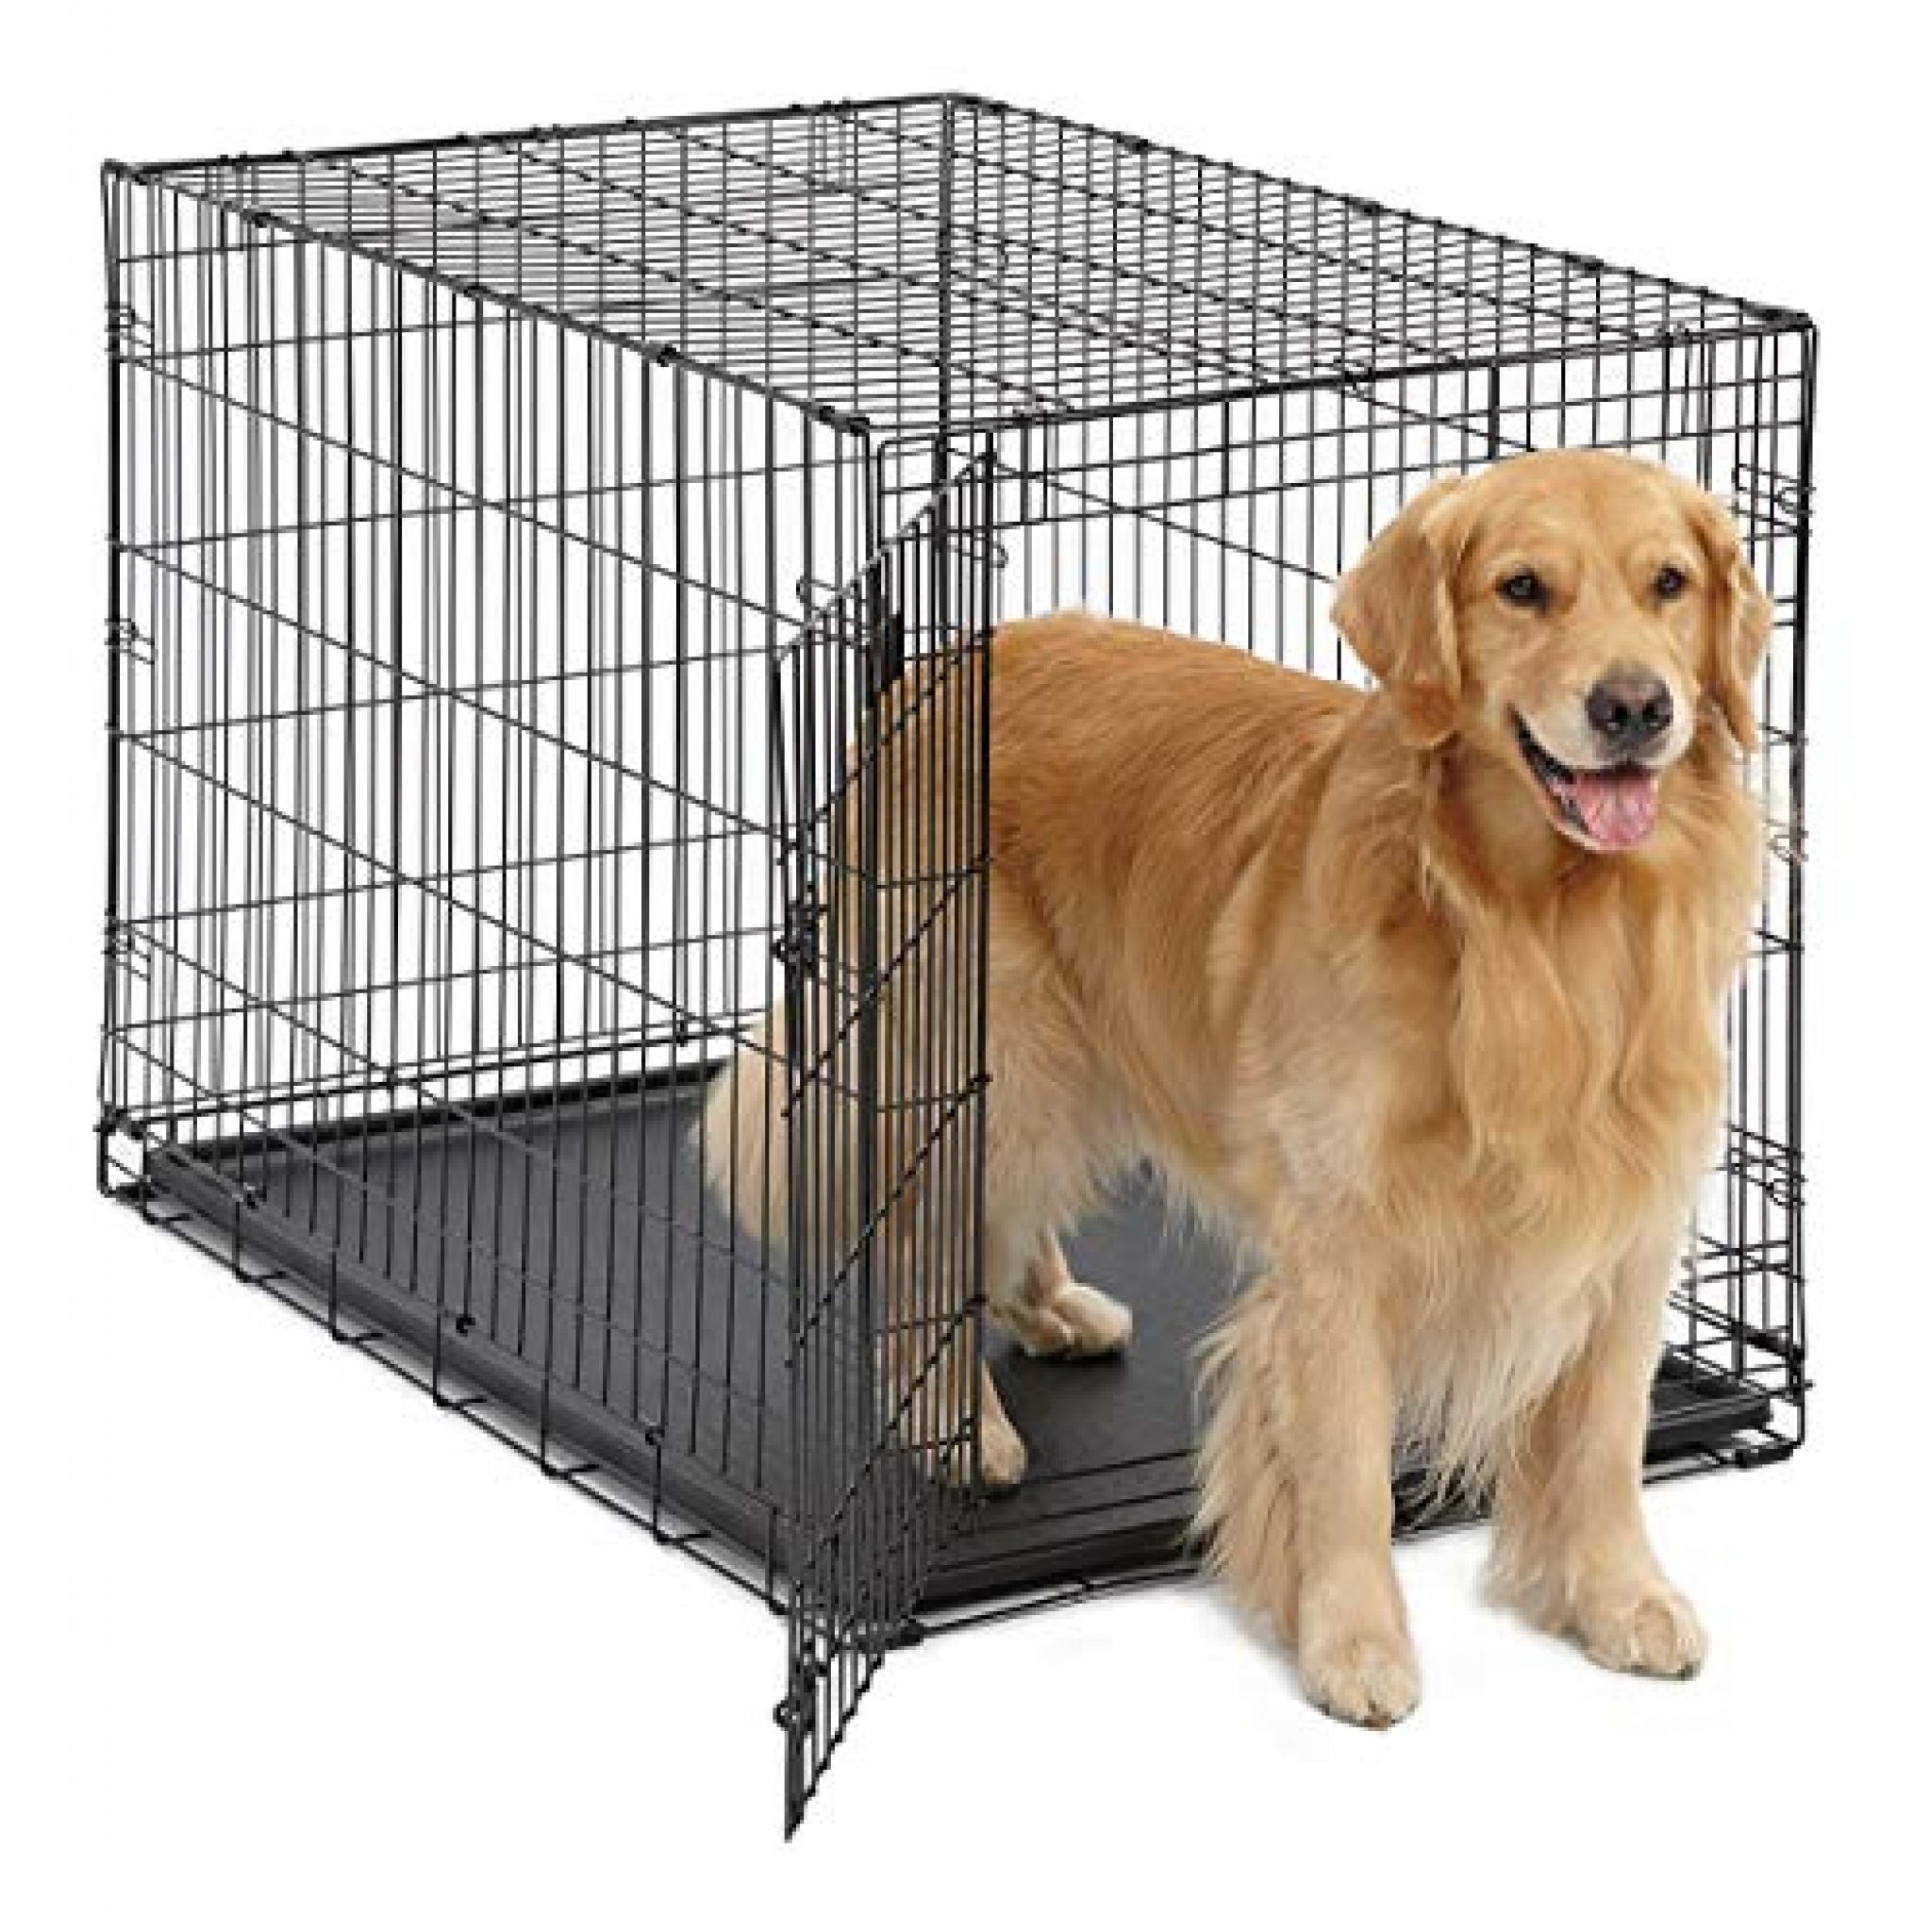 Large Dog Crate | MidWest ICrate Folding Metal Dog Crate | Divider